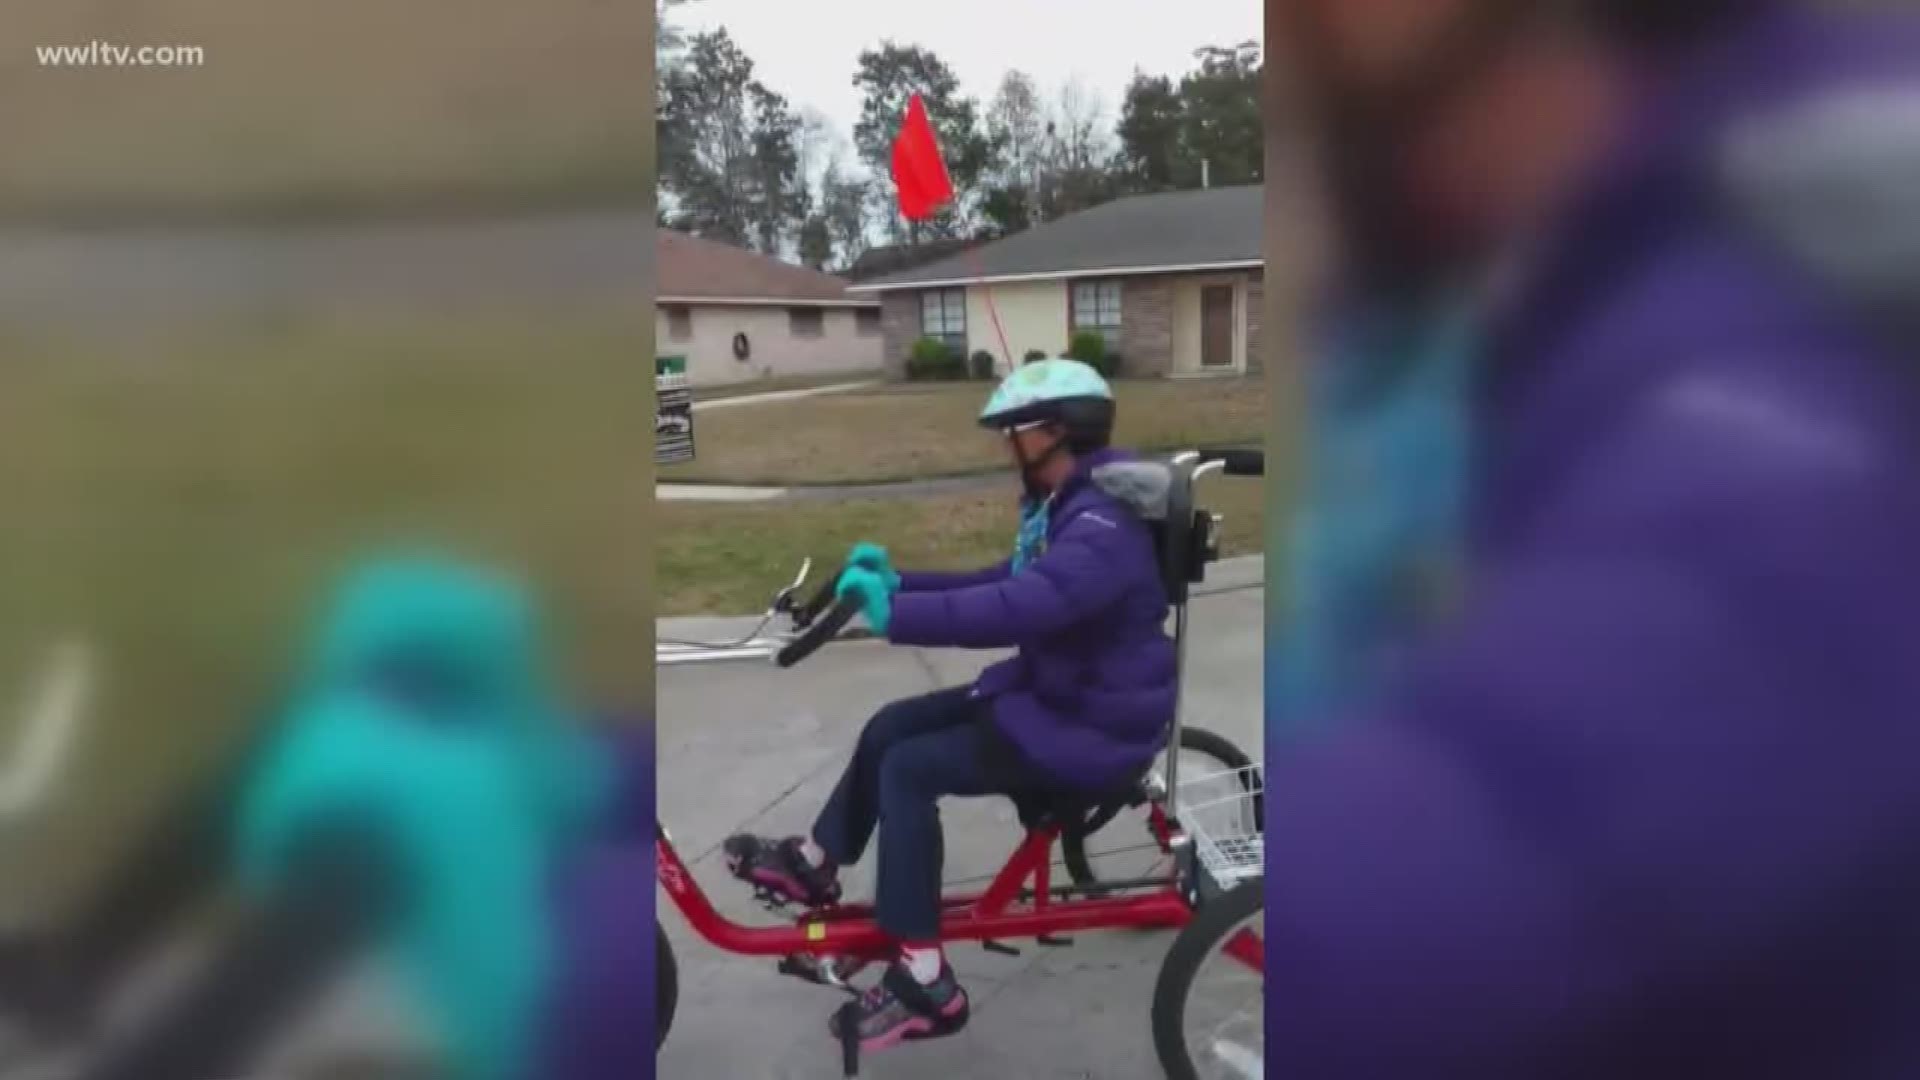 The tricycle was used by a 12-year-old girl from Slidell with special needs. 